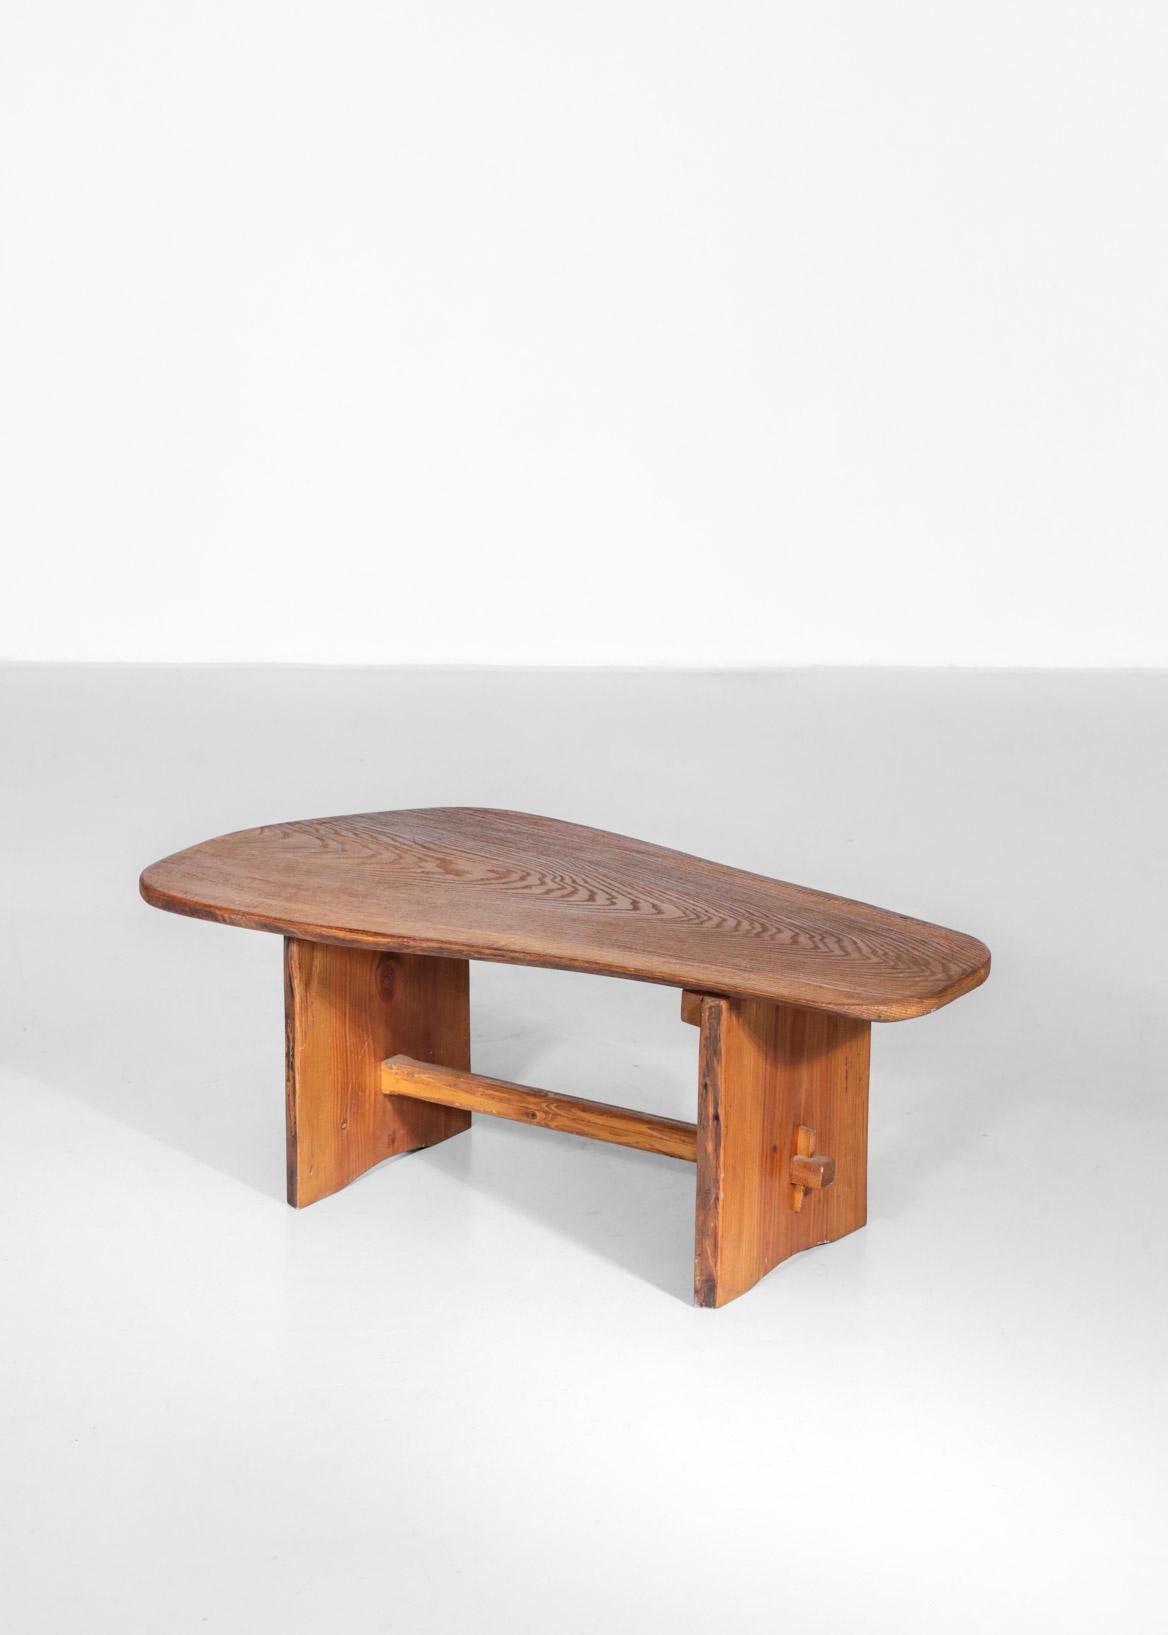 Brutalist coffee table solid pine 1970s sculptural.